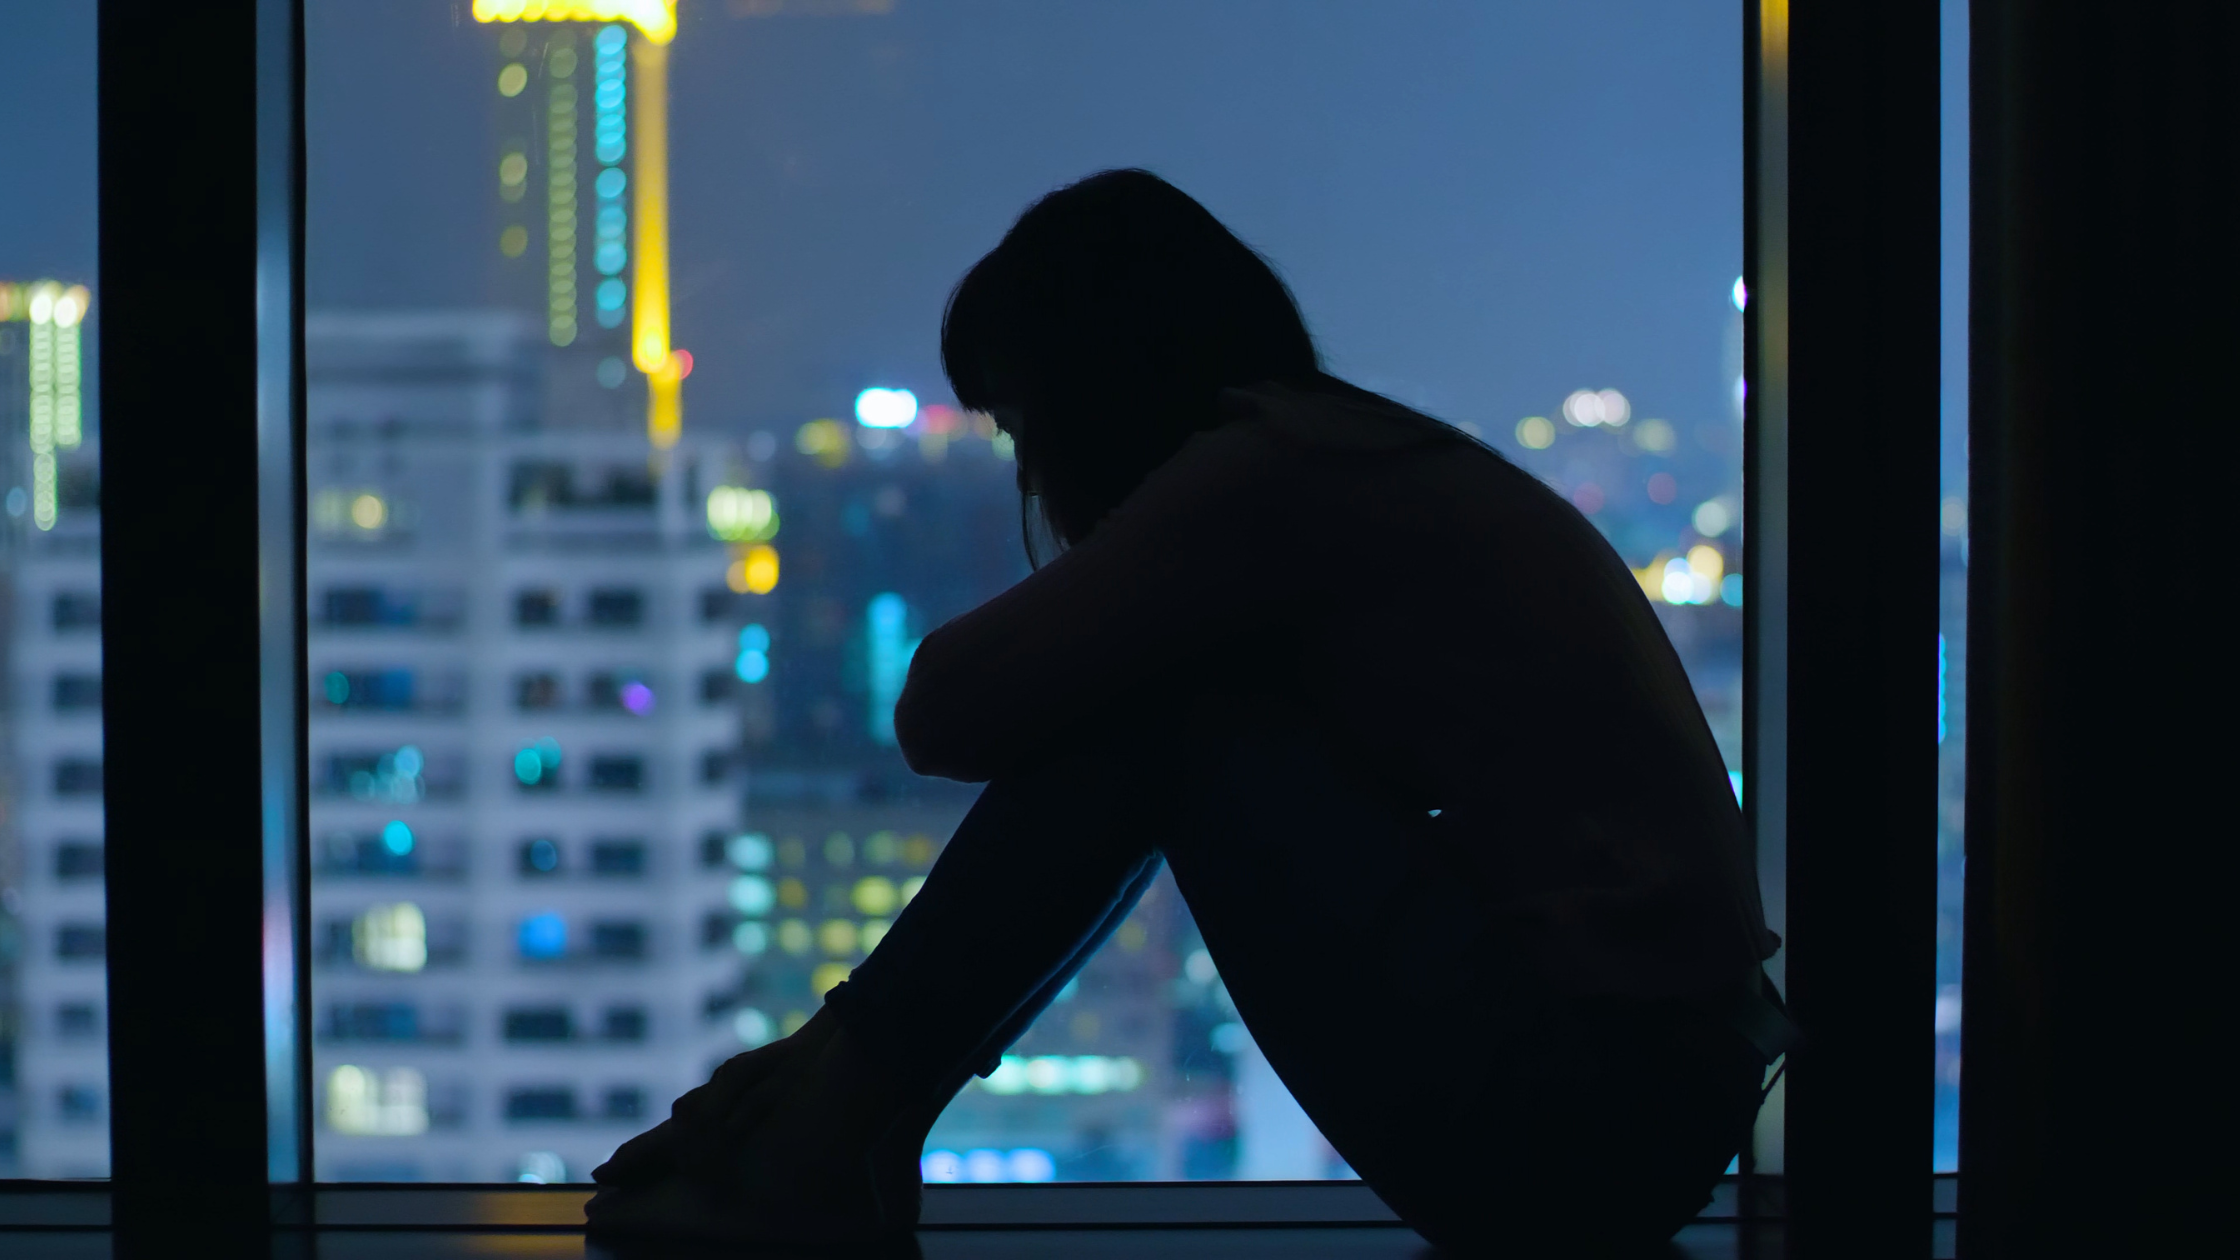 silhouette of a person sitting against a window with a night skyline